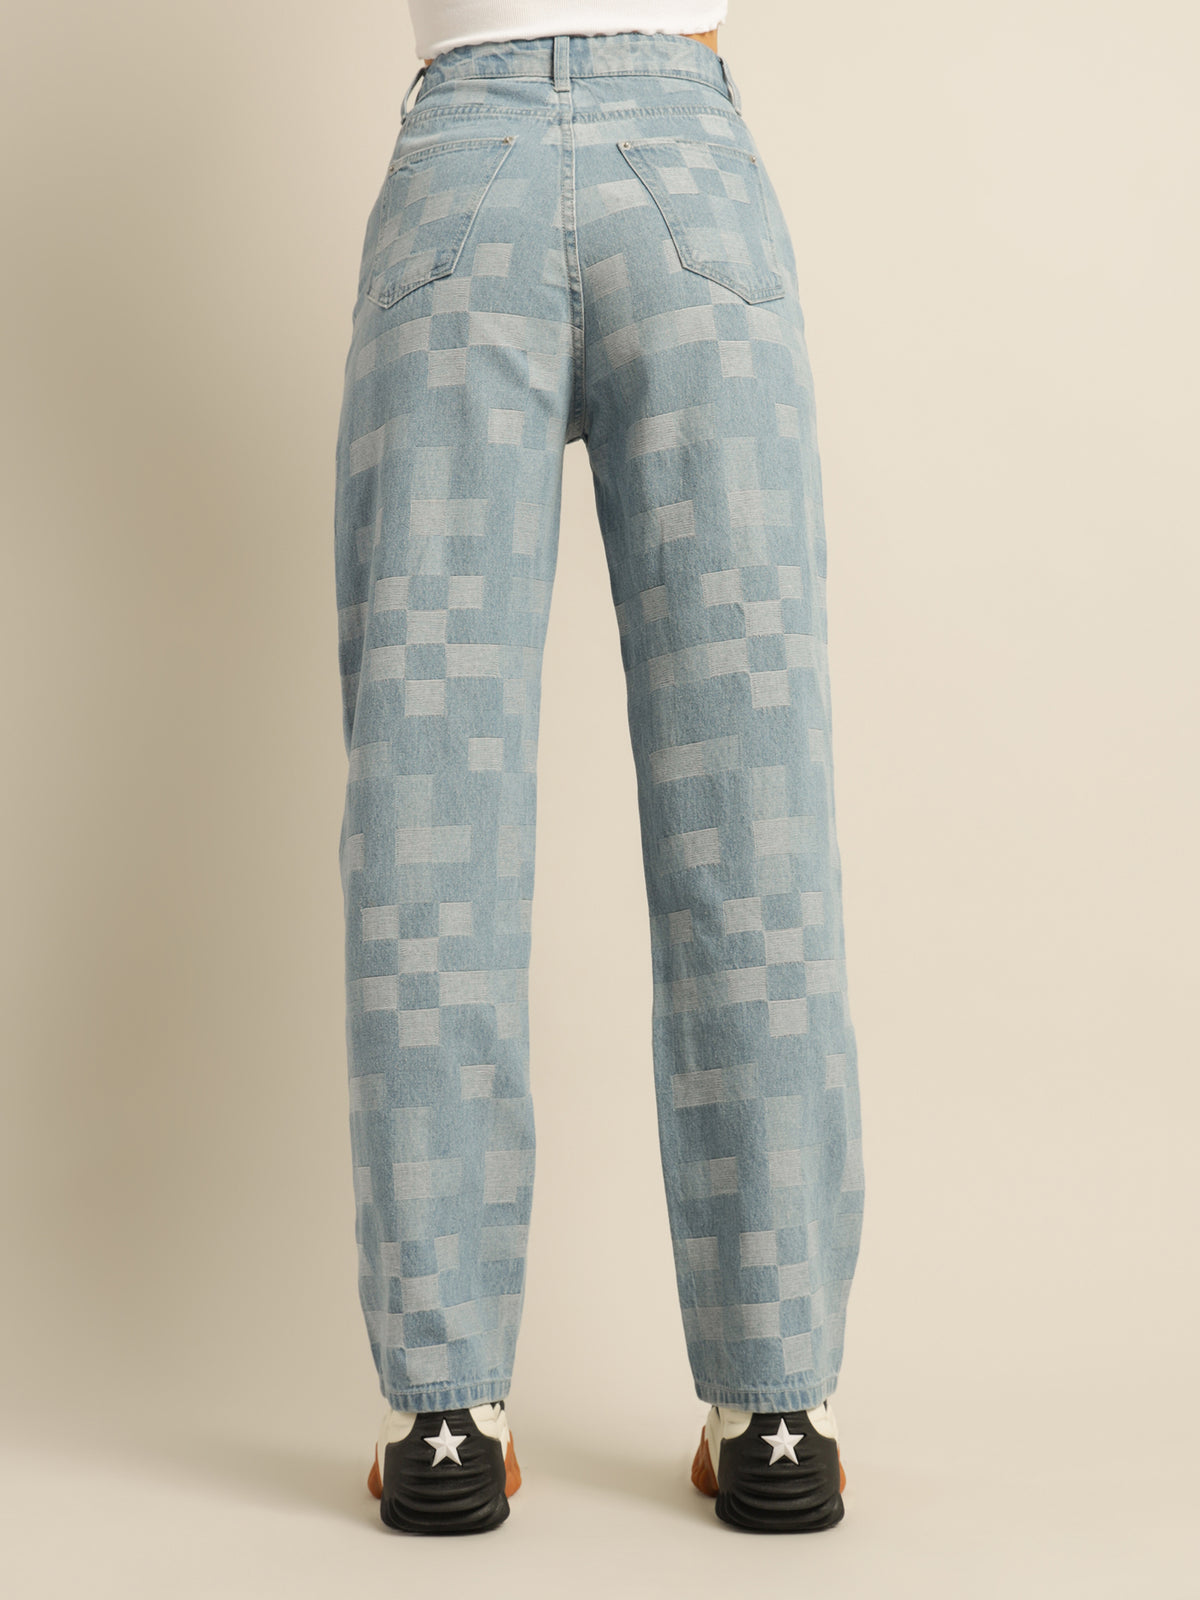 Bri Baggy Jeans in Checkerboard